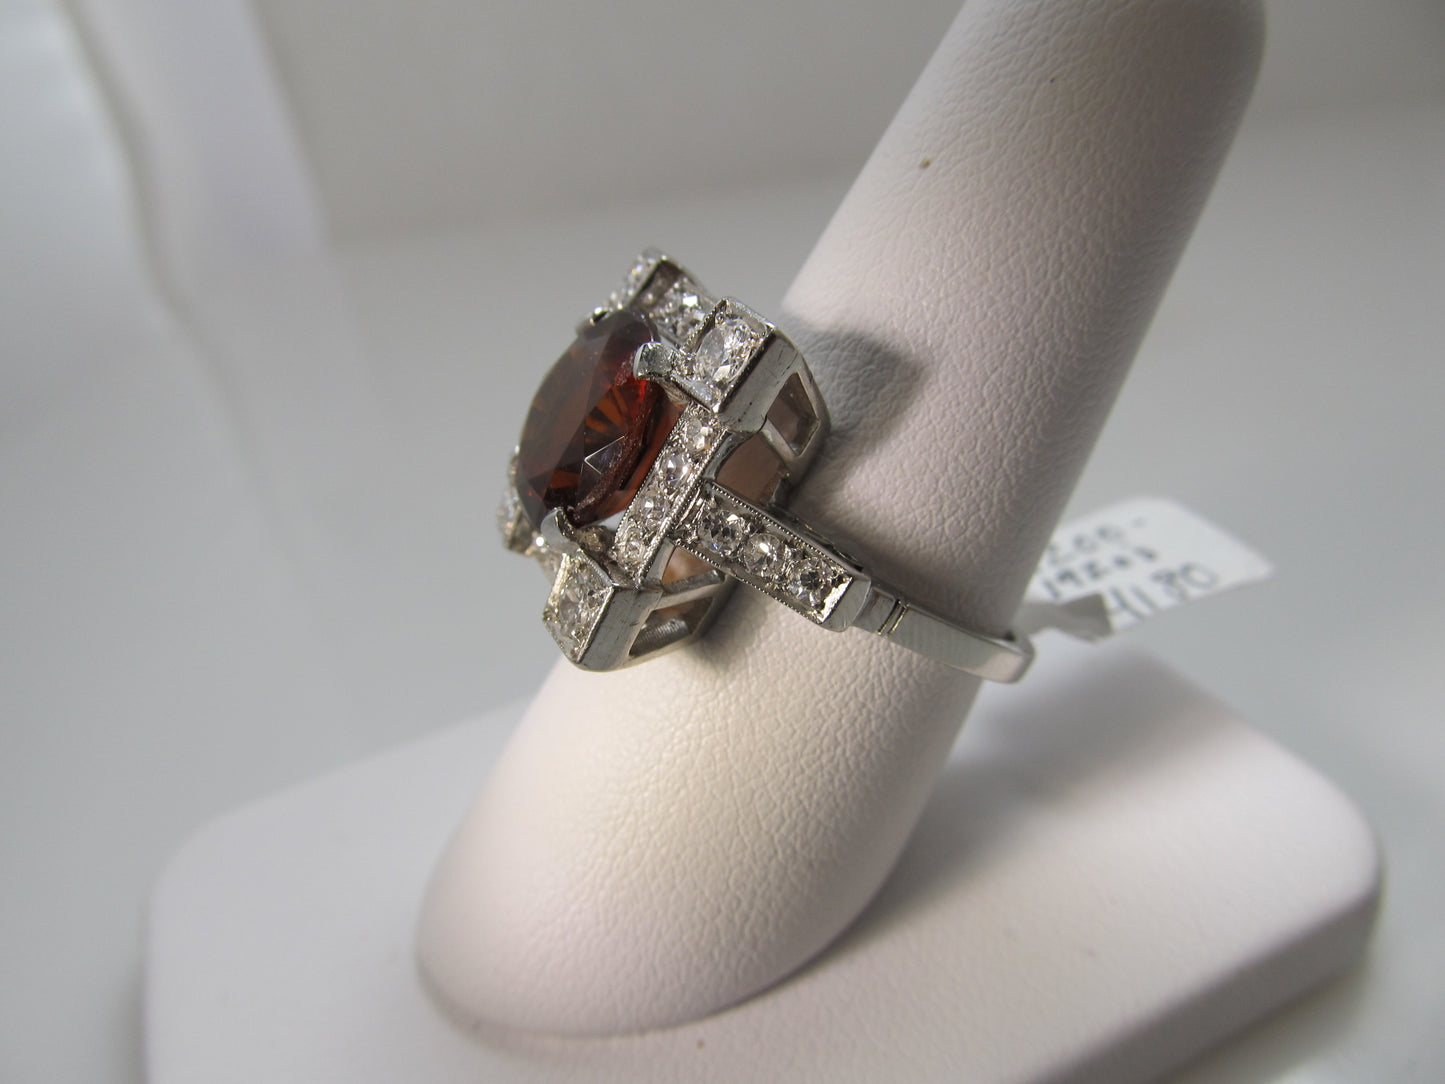 Huge antique platinum ring with a garnet and diamonds